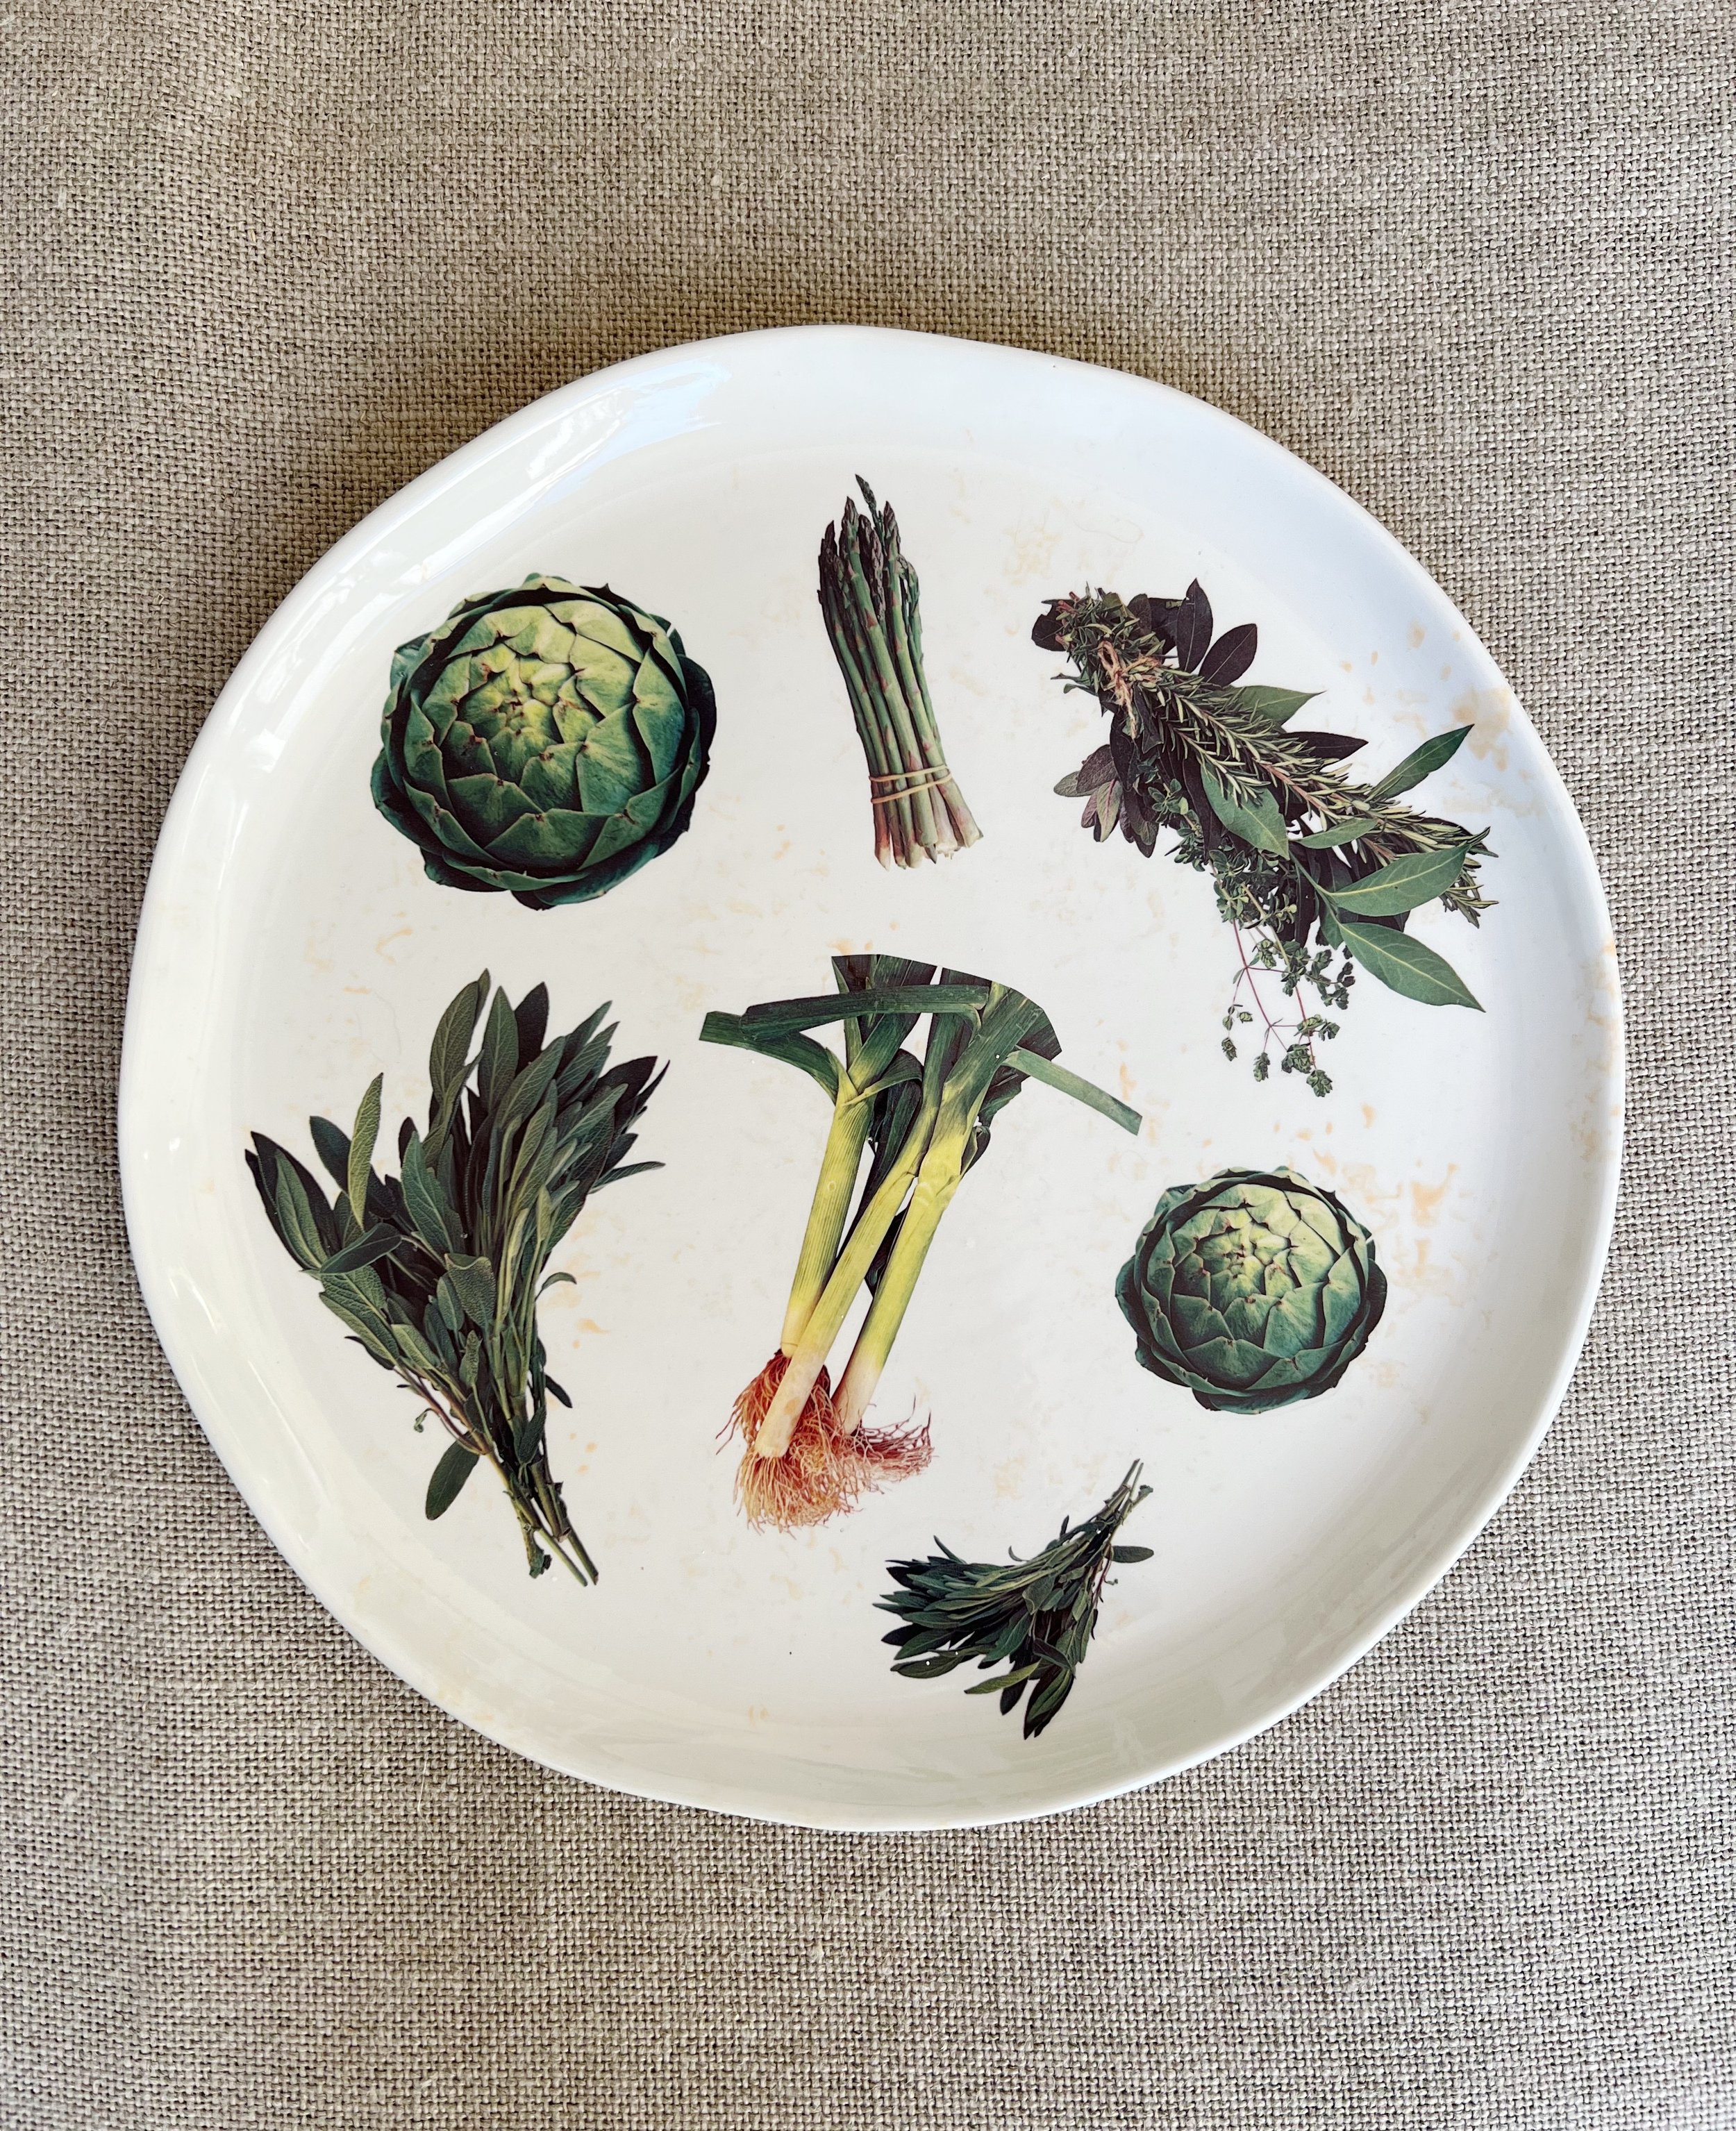 Herbs and Greens Ceramic Large Plate